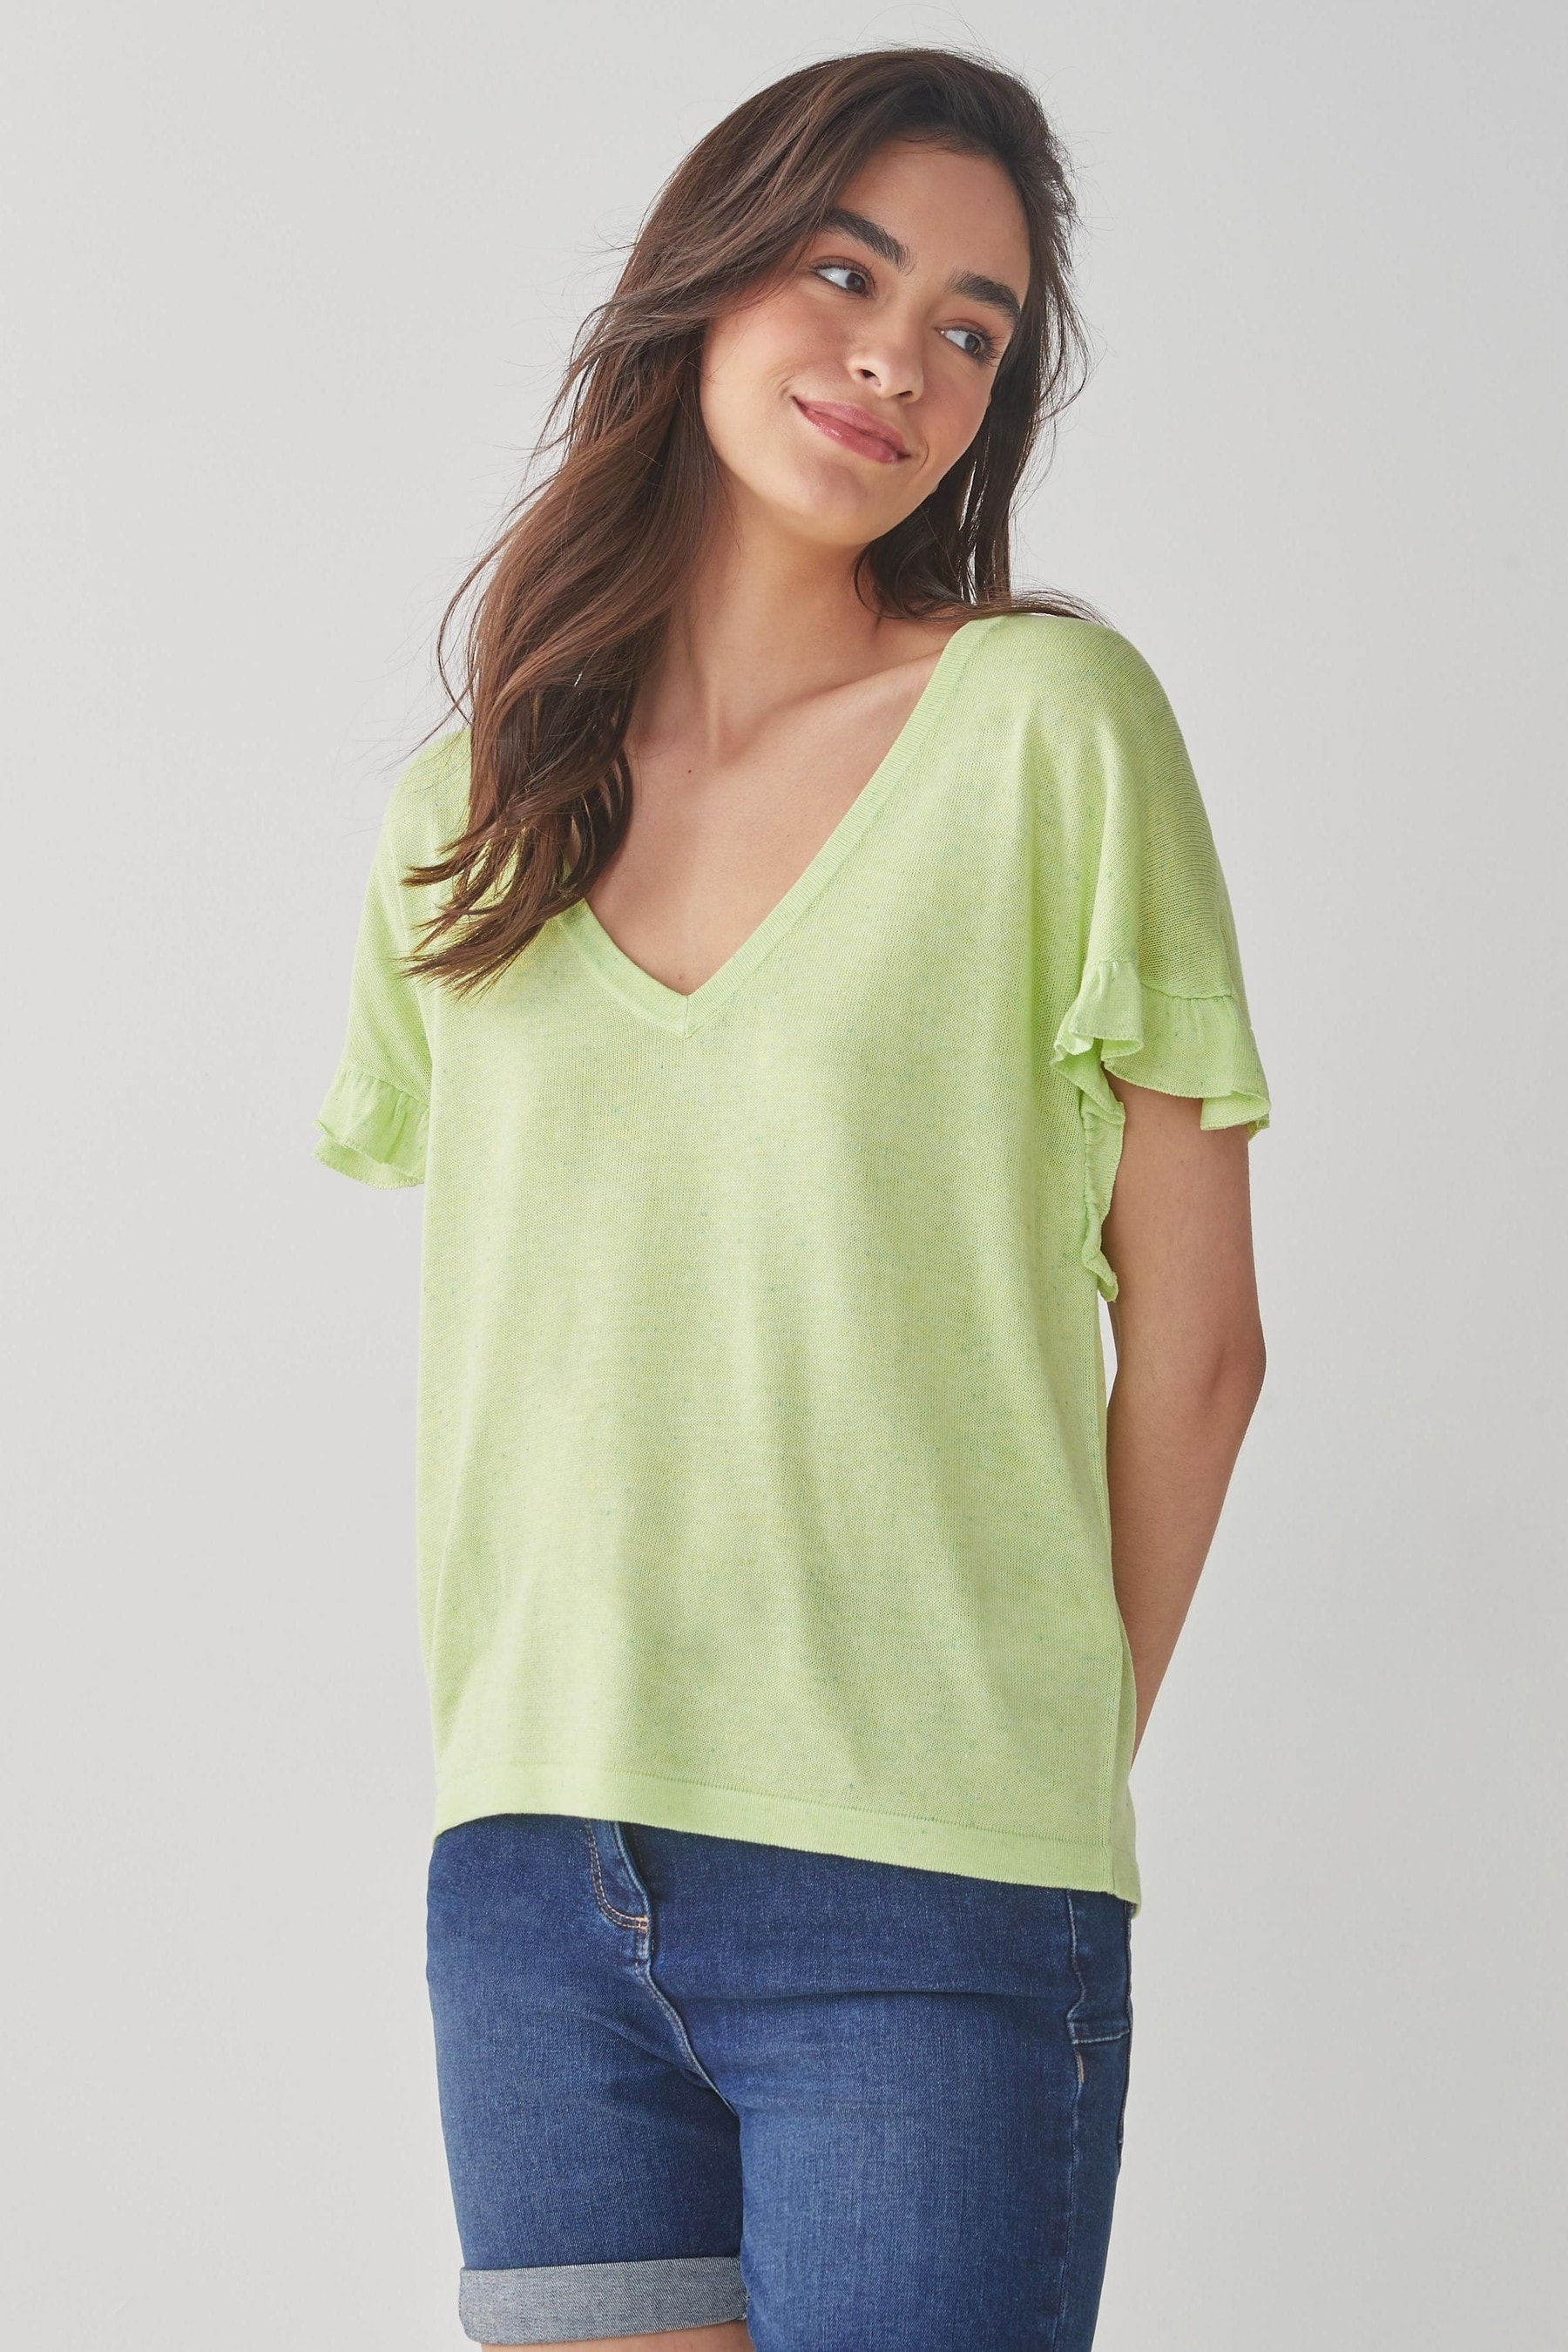 buy-ruffle-sleeve-t-shirt-from-the-next-uk-online-shop